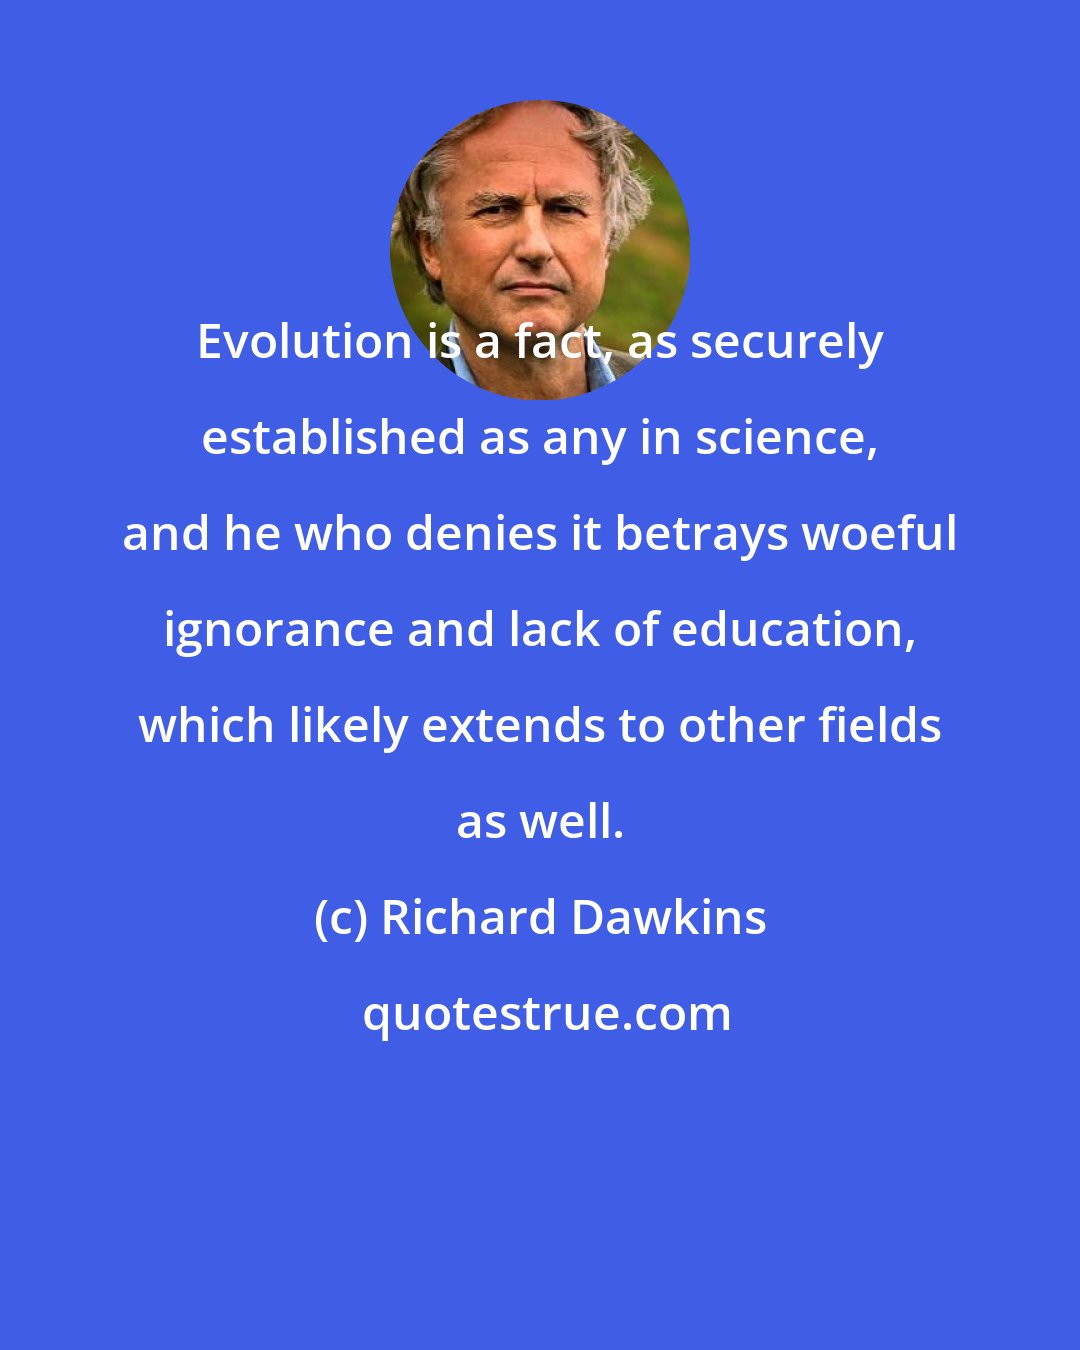 Richard Dawkins: Evolution is a fact, as securely established as any in science, and he who denies it betrays woeful ignorance and lack of education, which likely extends to other fields as well.